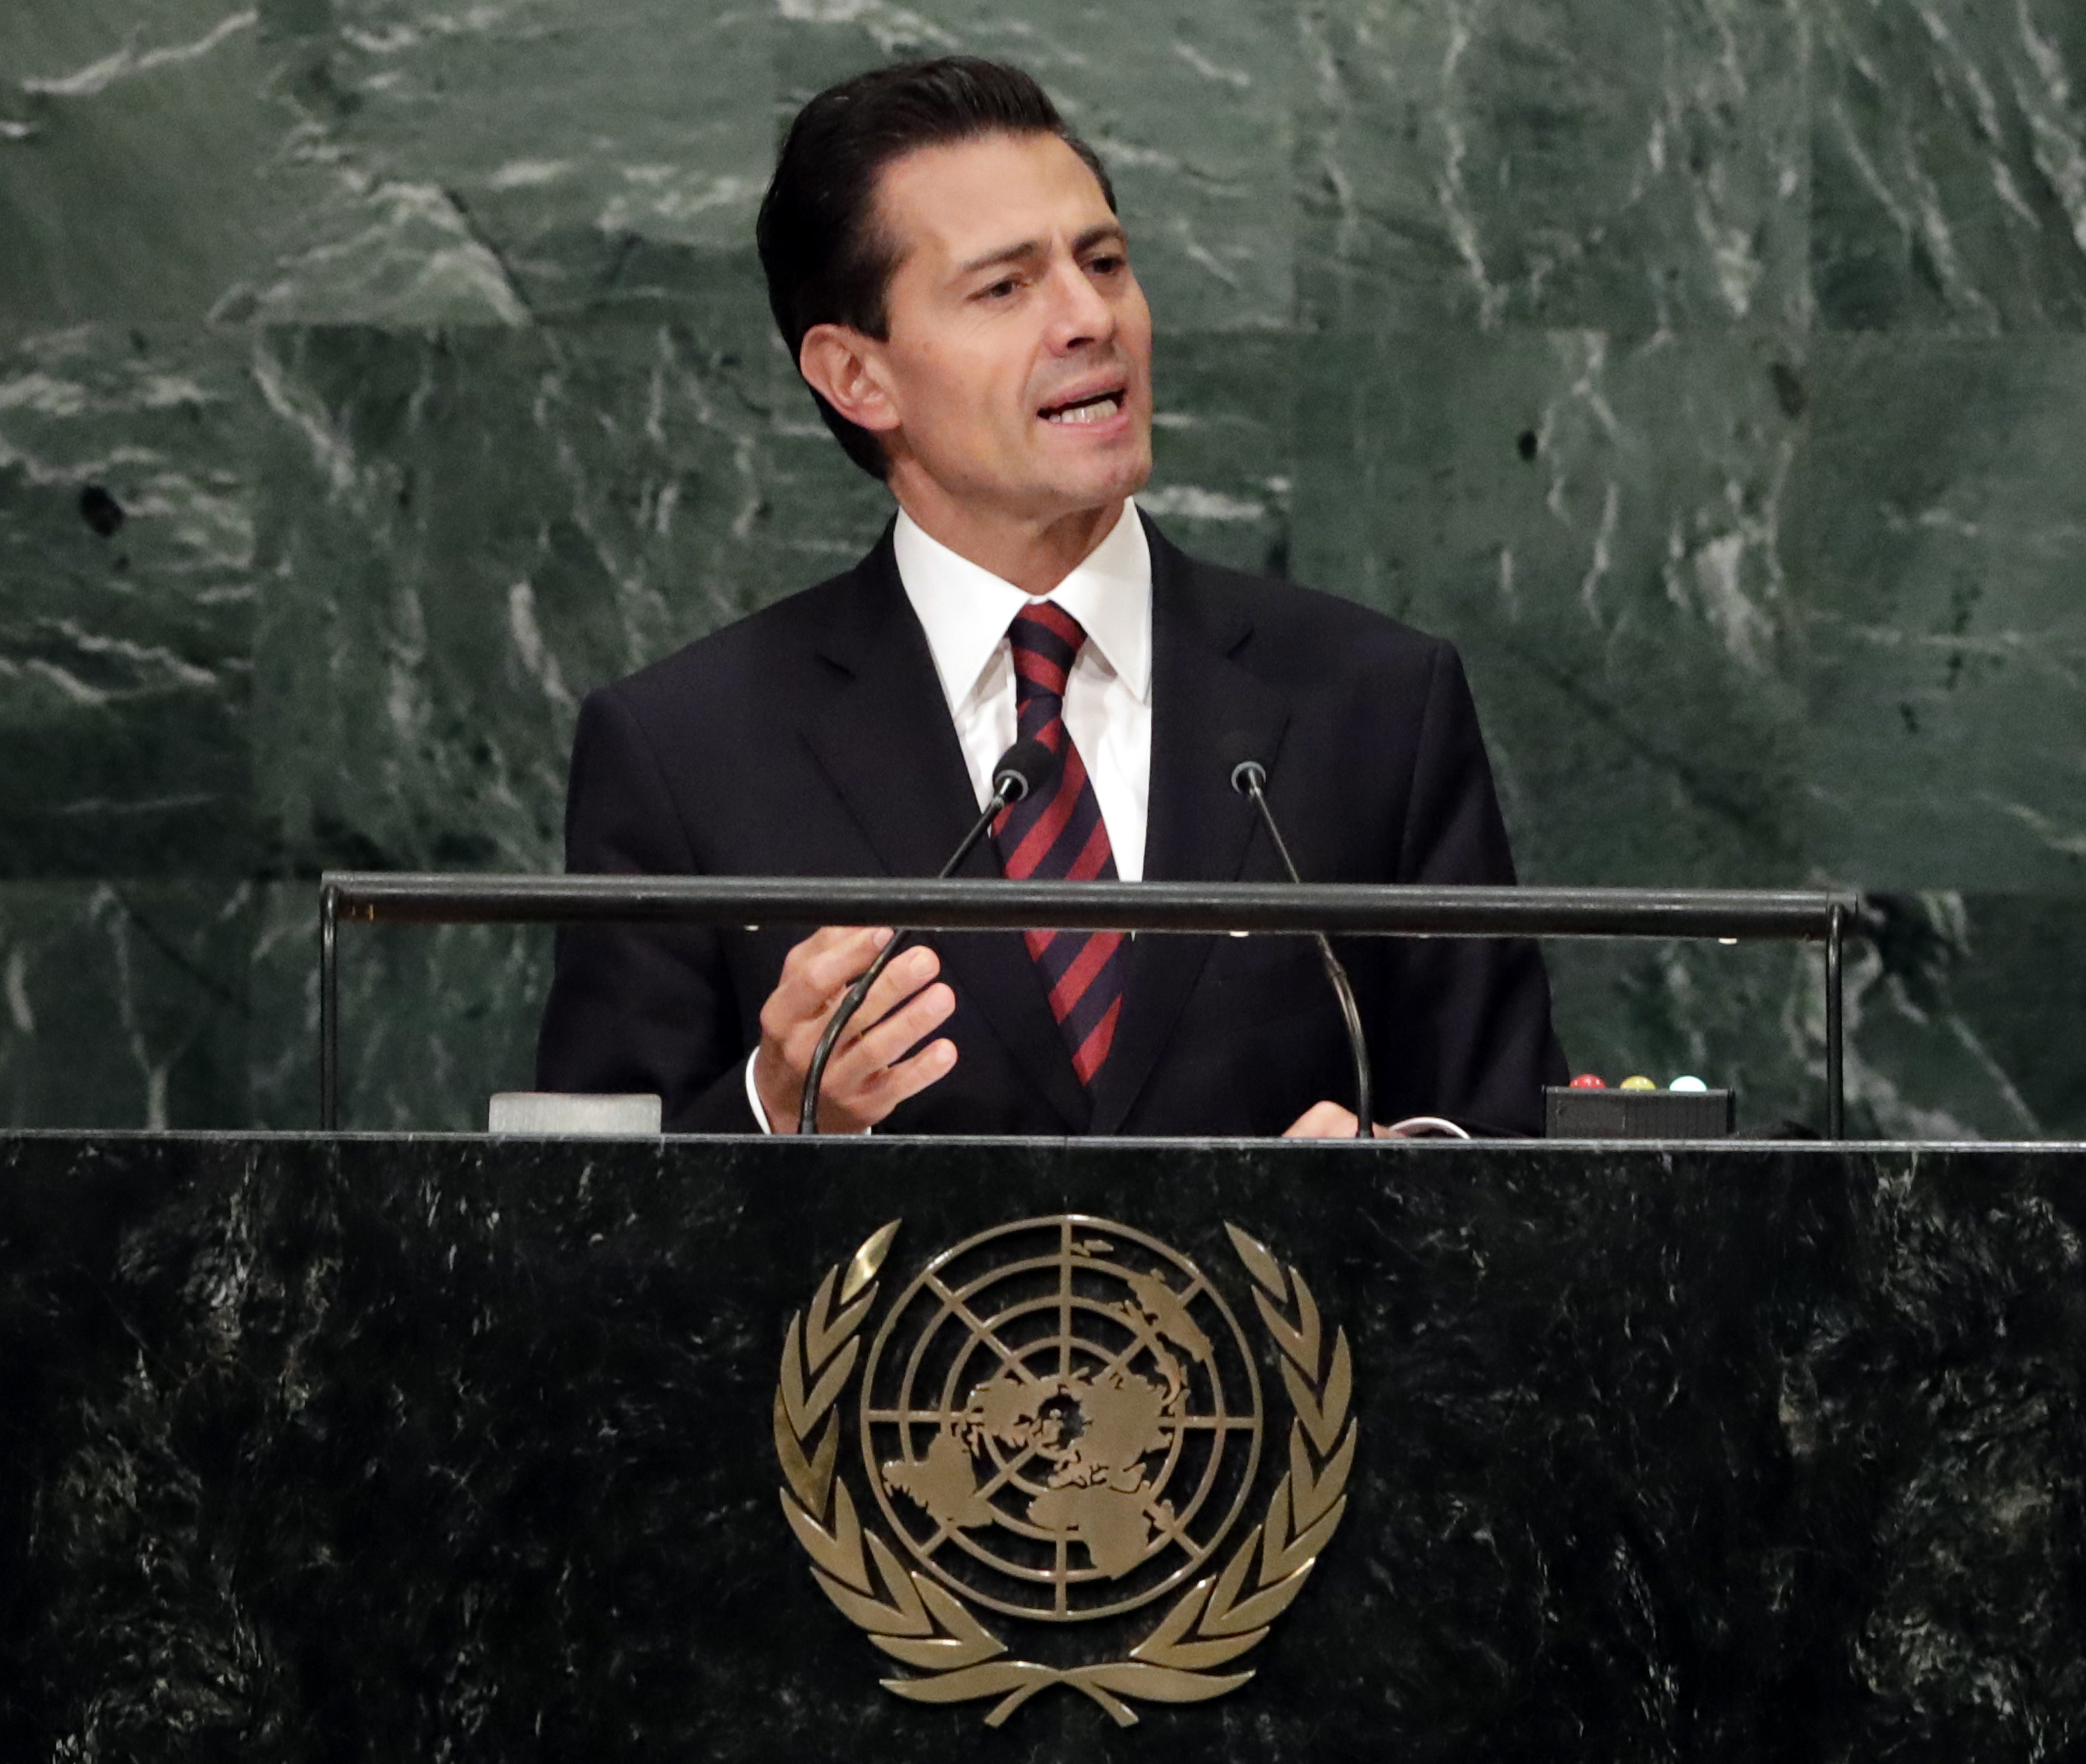 Mexican President Enrique Peña Nieto addresses the General Debate of the 71st Session of the U.N. General Assembly at the U.N. headquarters in New York City on Sept. 20, 2016 (Jason Szenes—EPA)